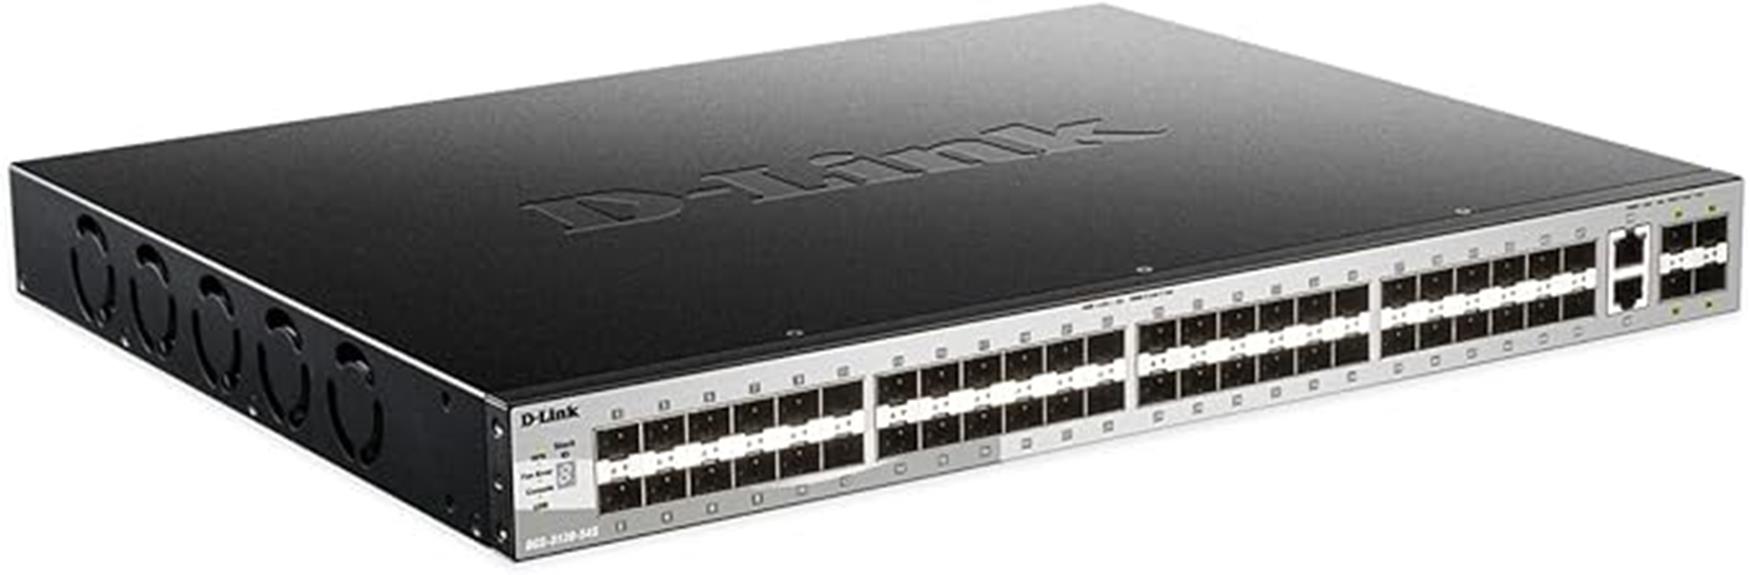 high performance network switch